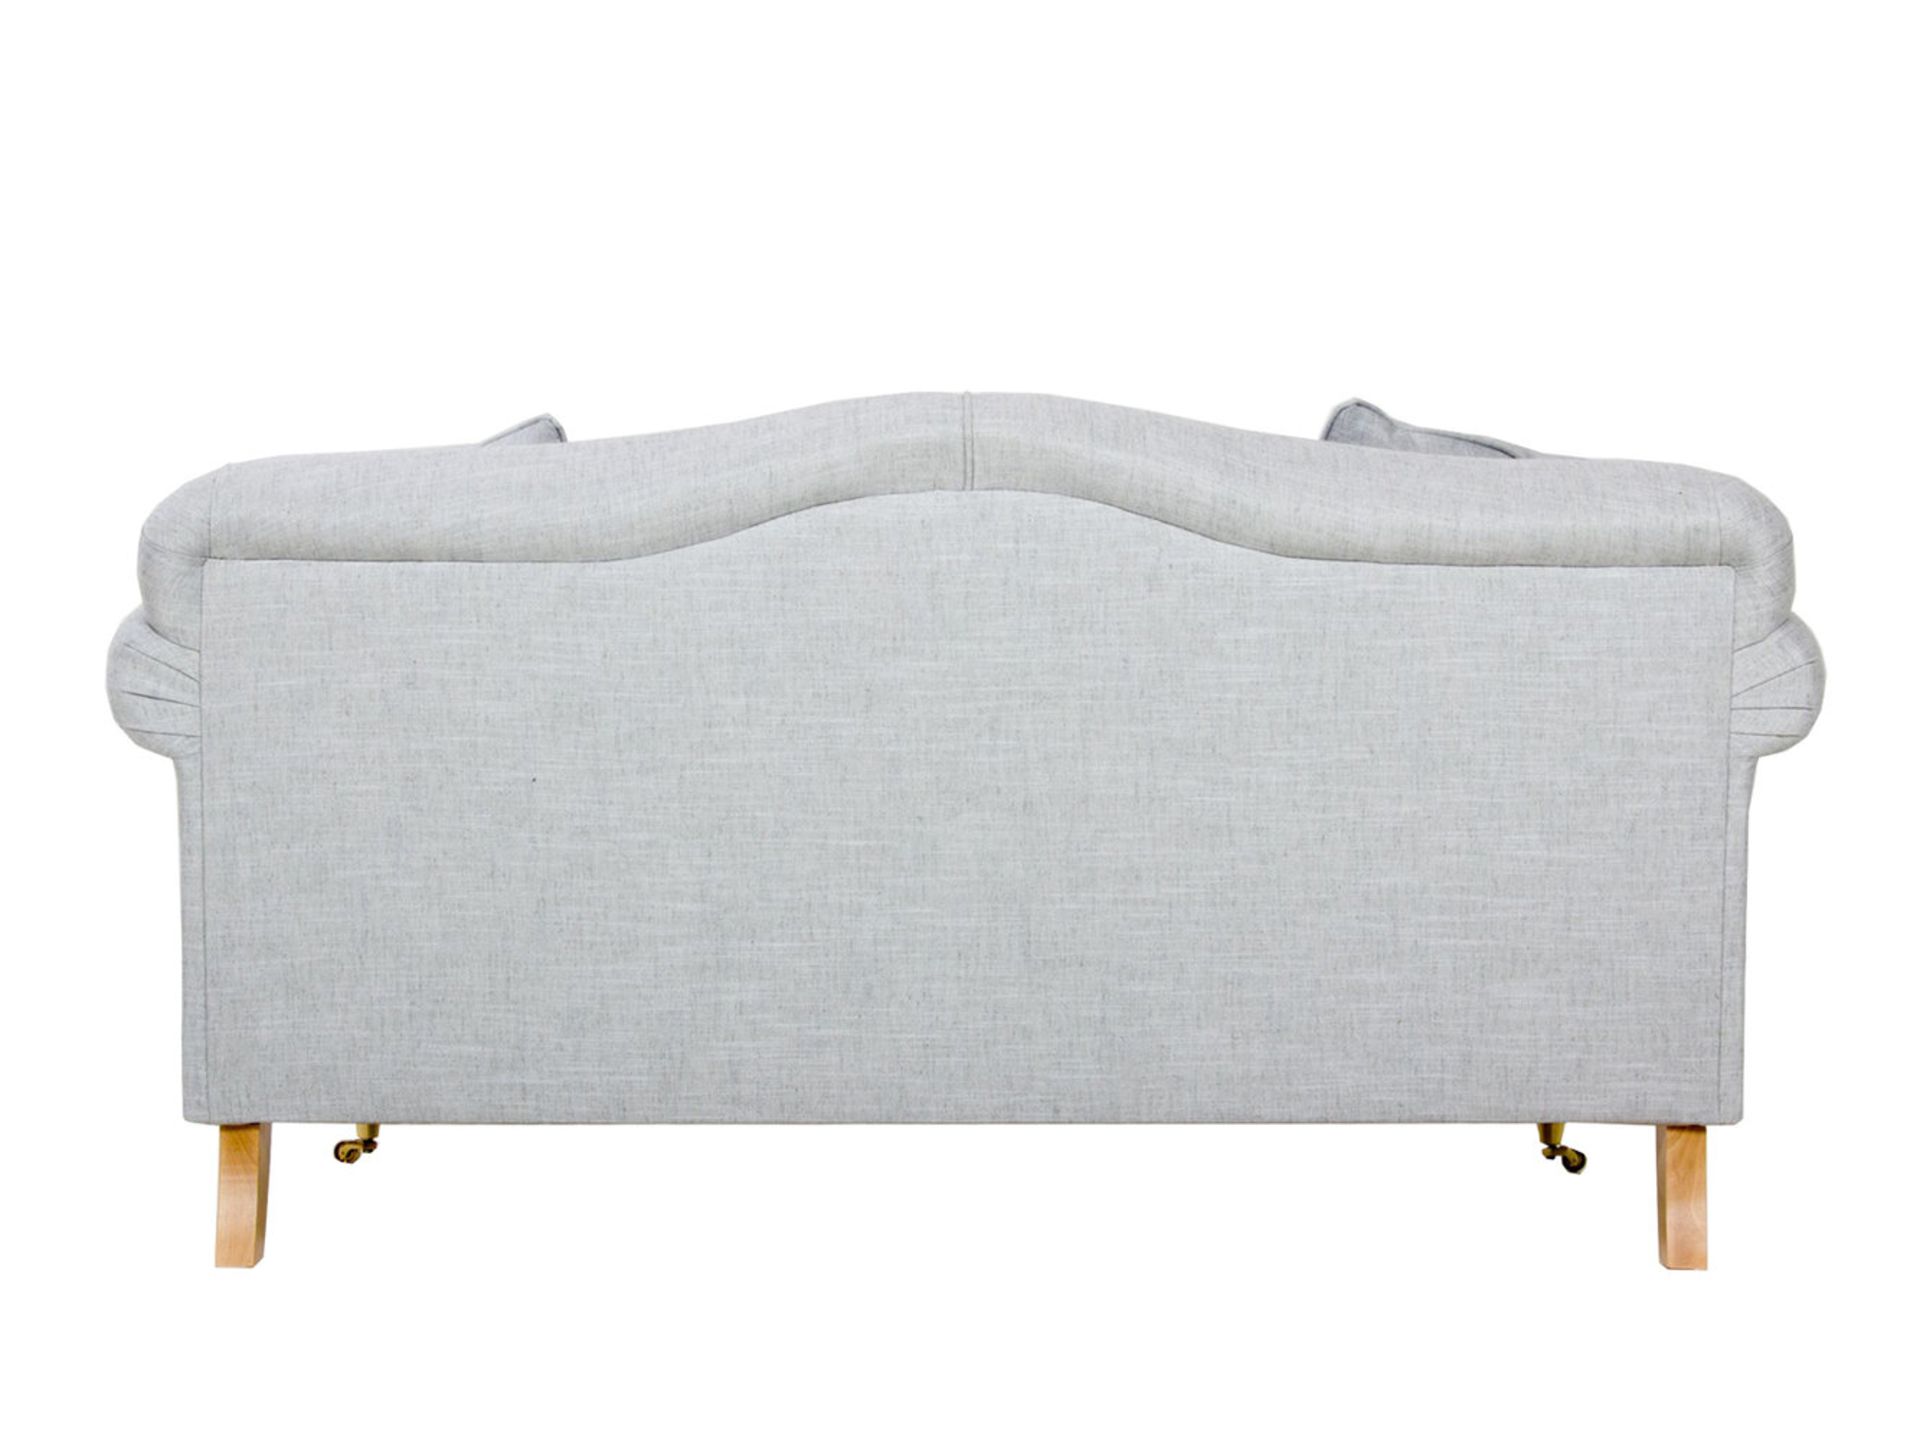 1 x Guilgud Sofa by Brewers Home - Ice White Upholstery - RRP £1,389! - Image 3 of 6